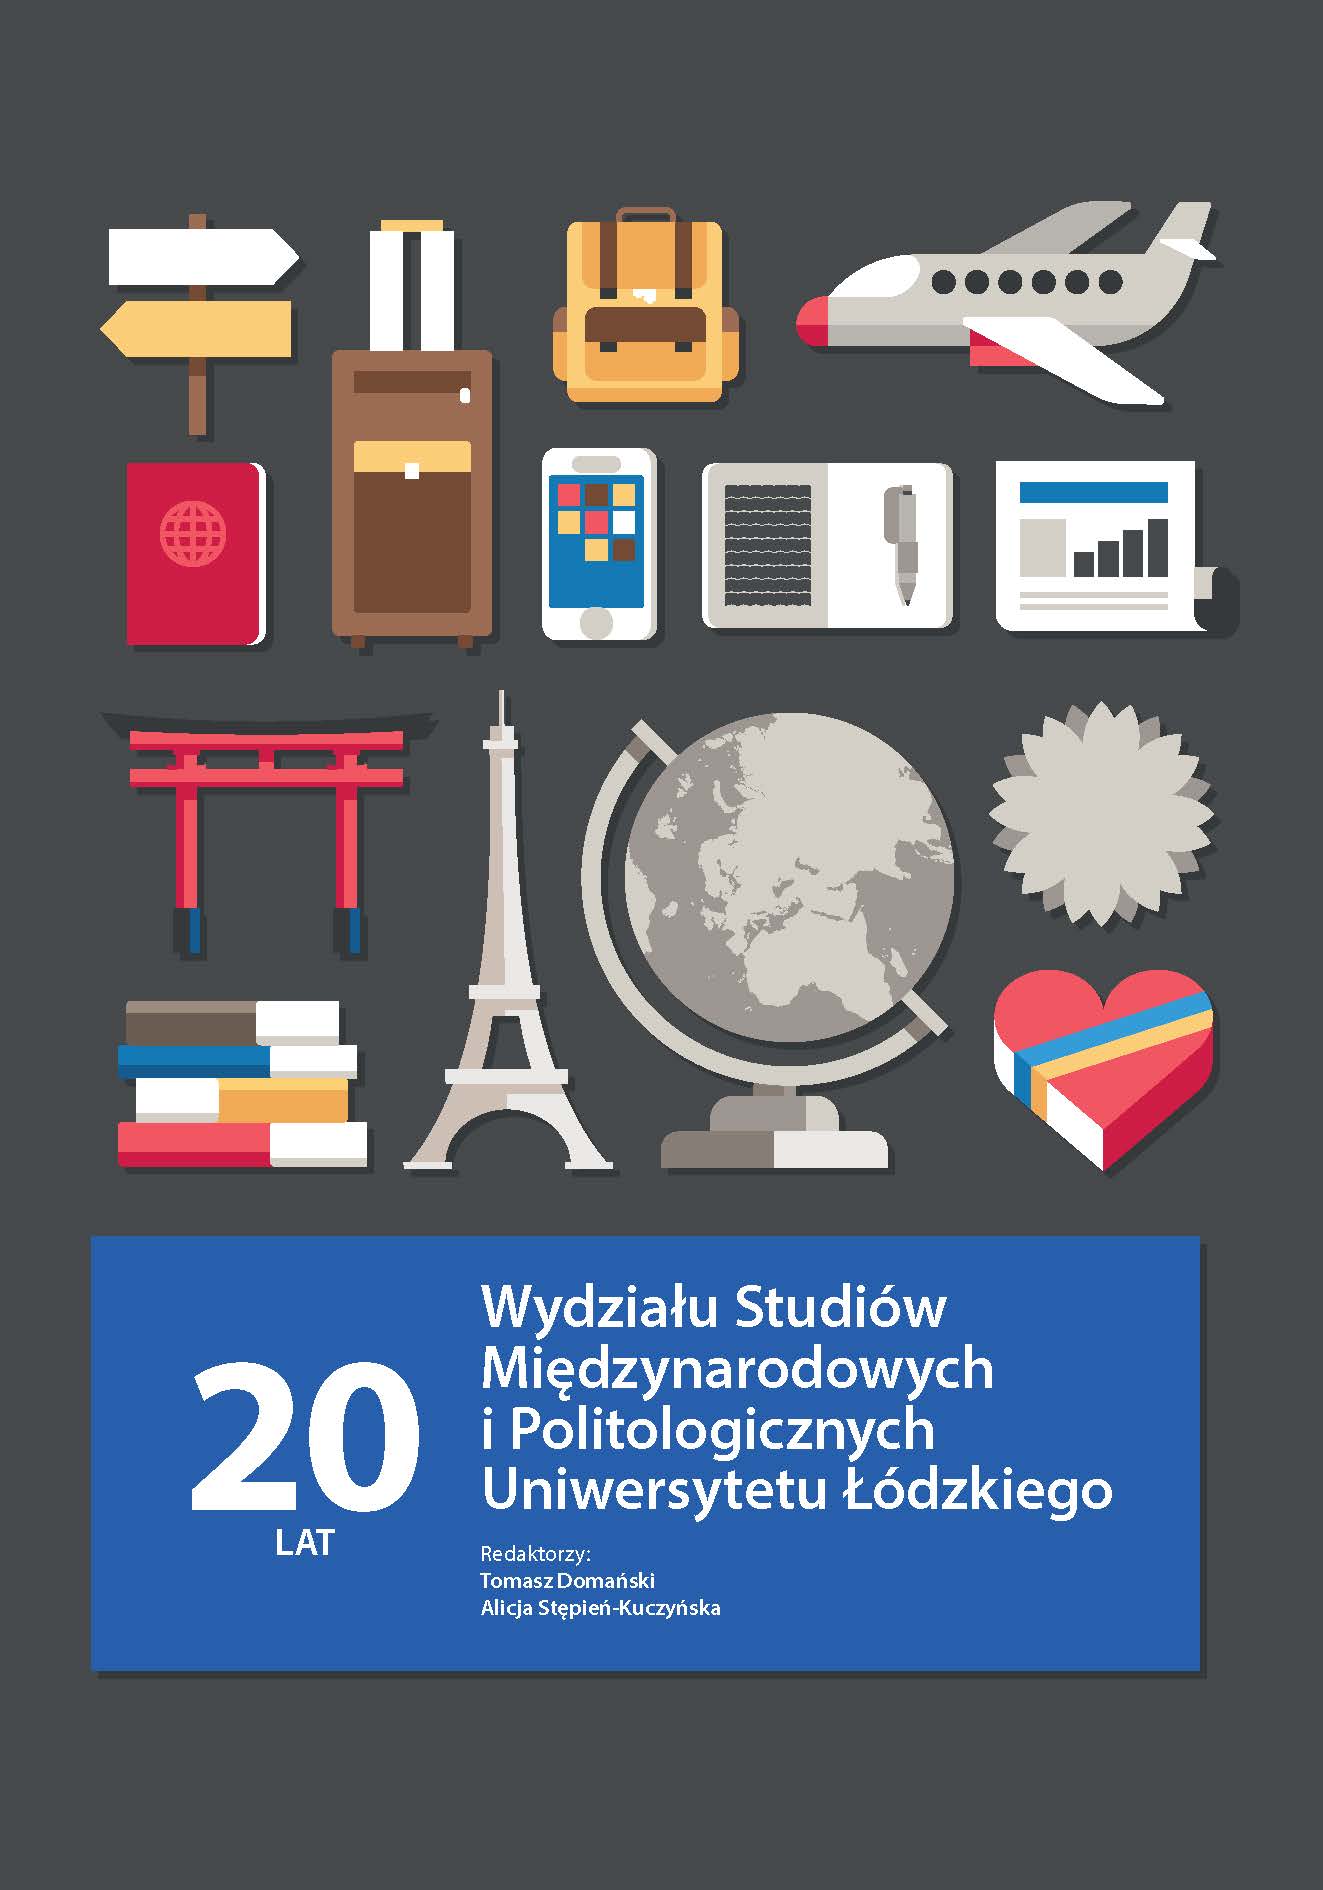 20 Years of the Faculty of International and Political Studies of the University of Łódź